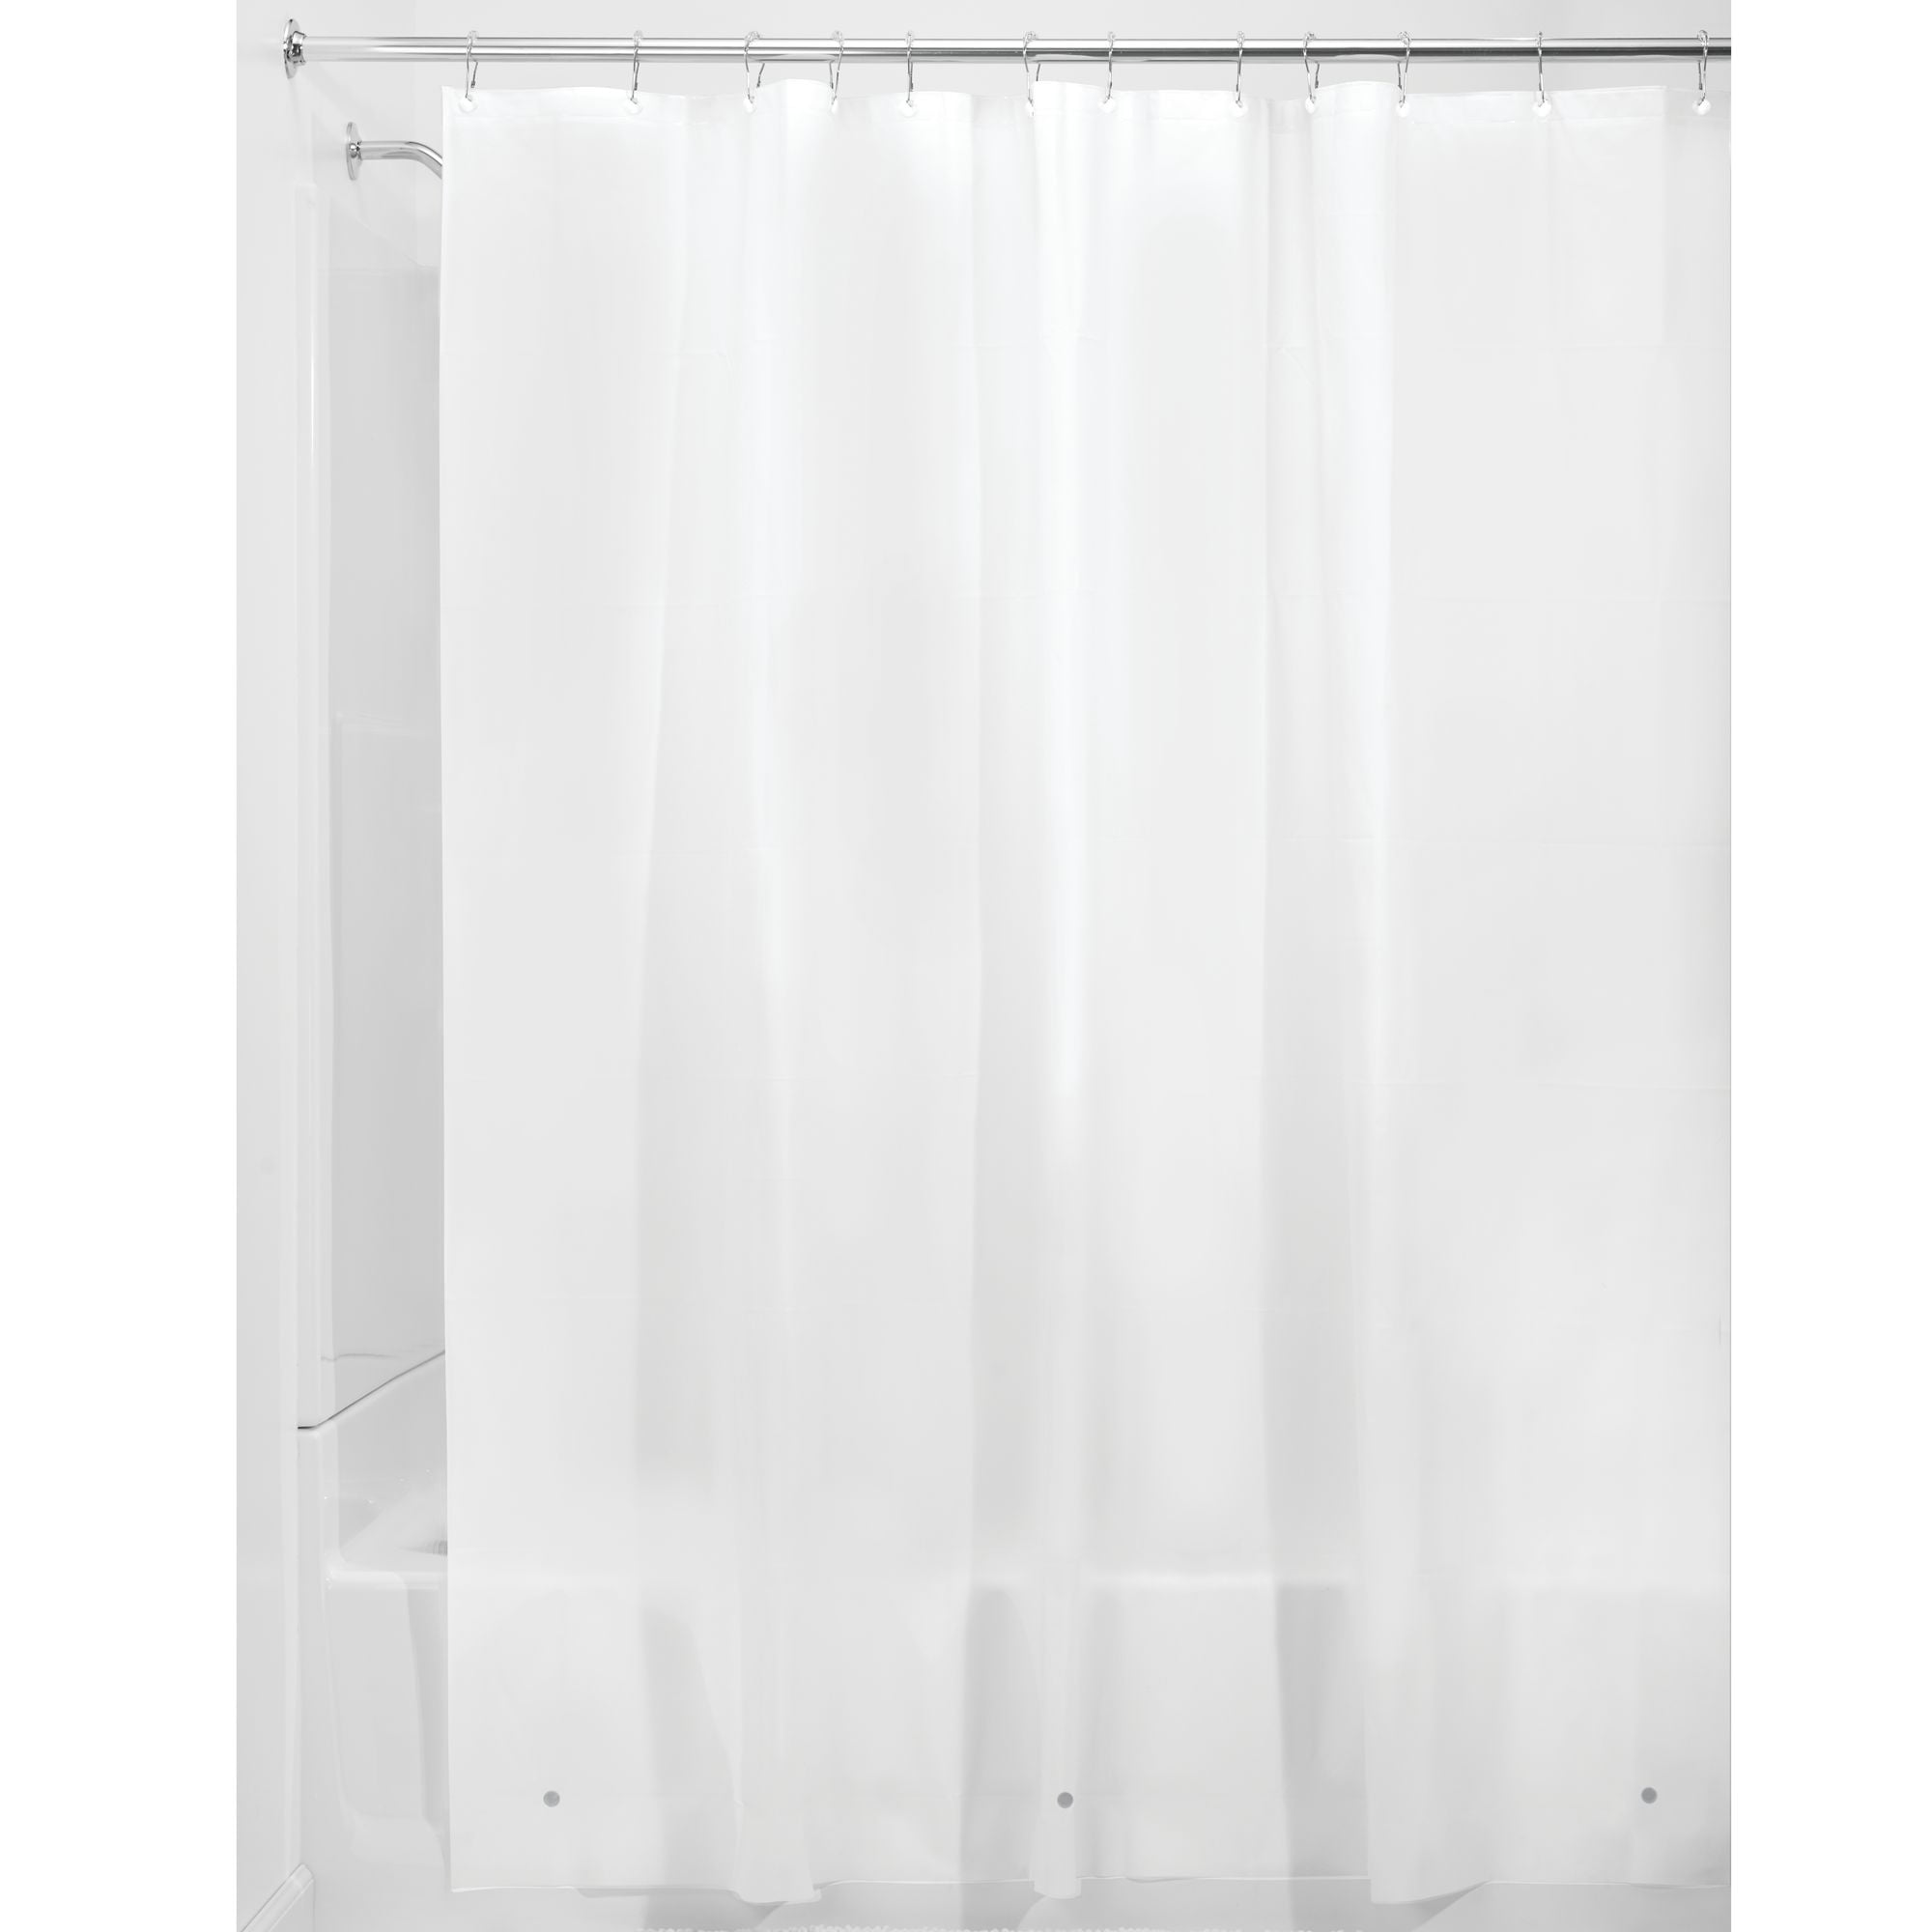 Made of Mould-Free PEVA White 180.0 x 200.0 cm InterDesign 3.0 Liner Curtain for Shower 